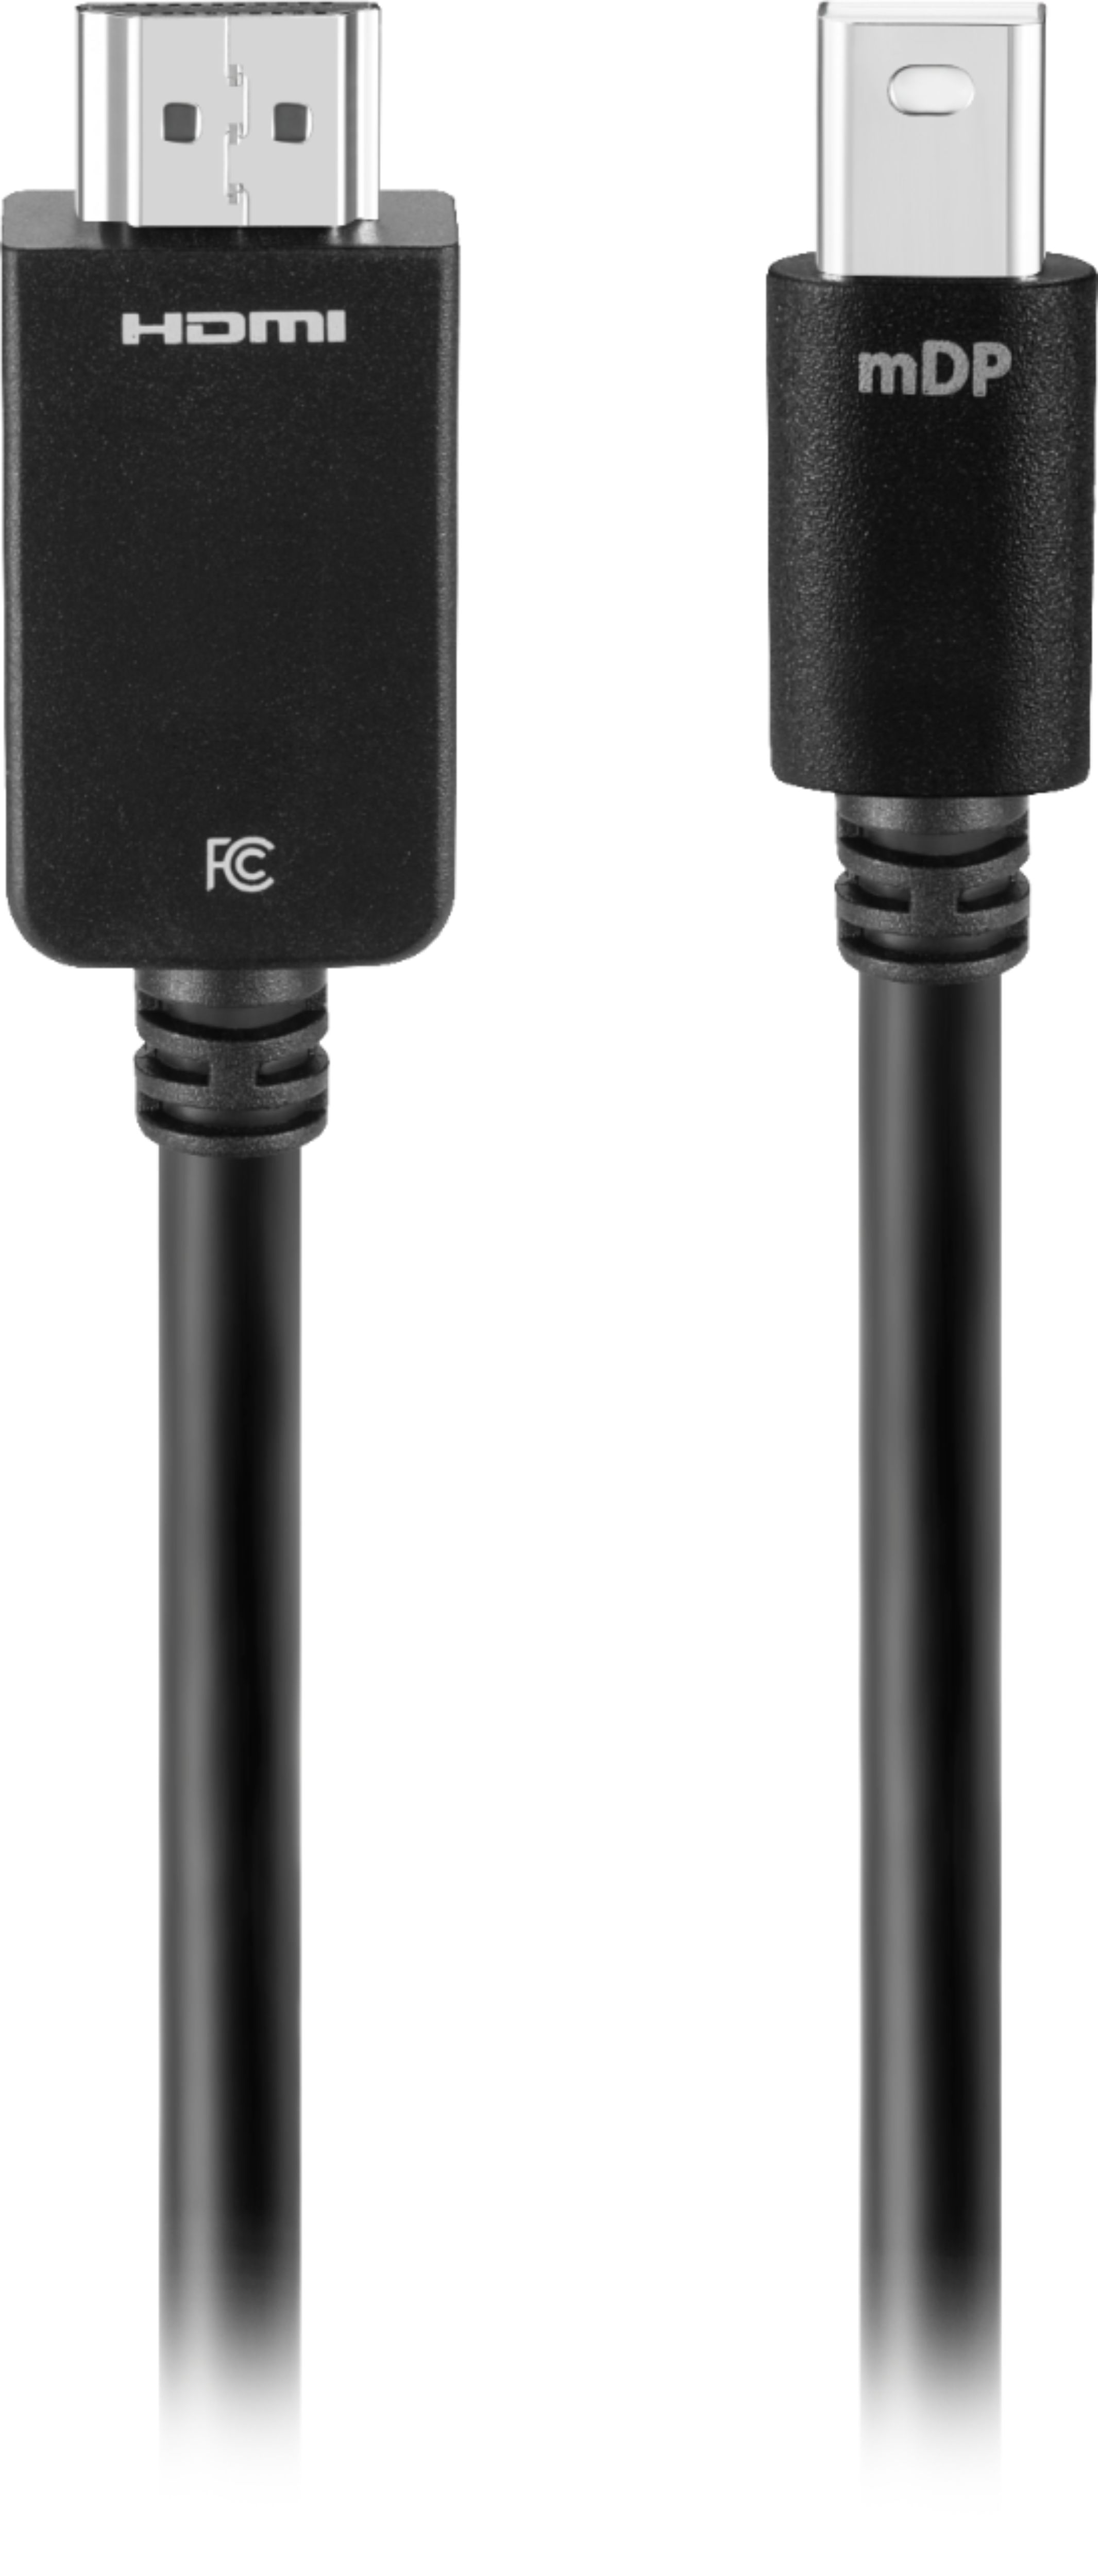 Angle View: Best Buy essentials™ - 6' Mini DisplayPort to HDMI Cable - Black